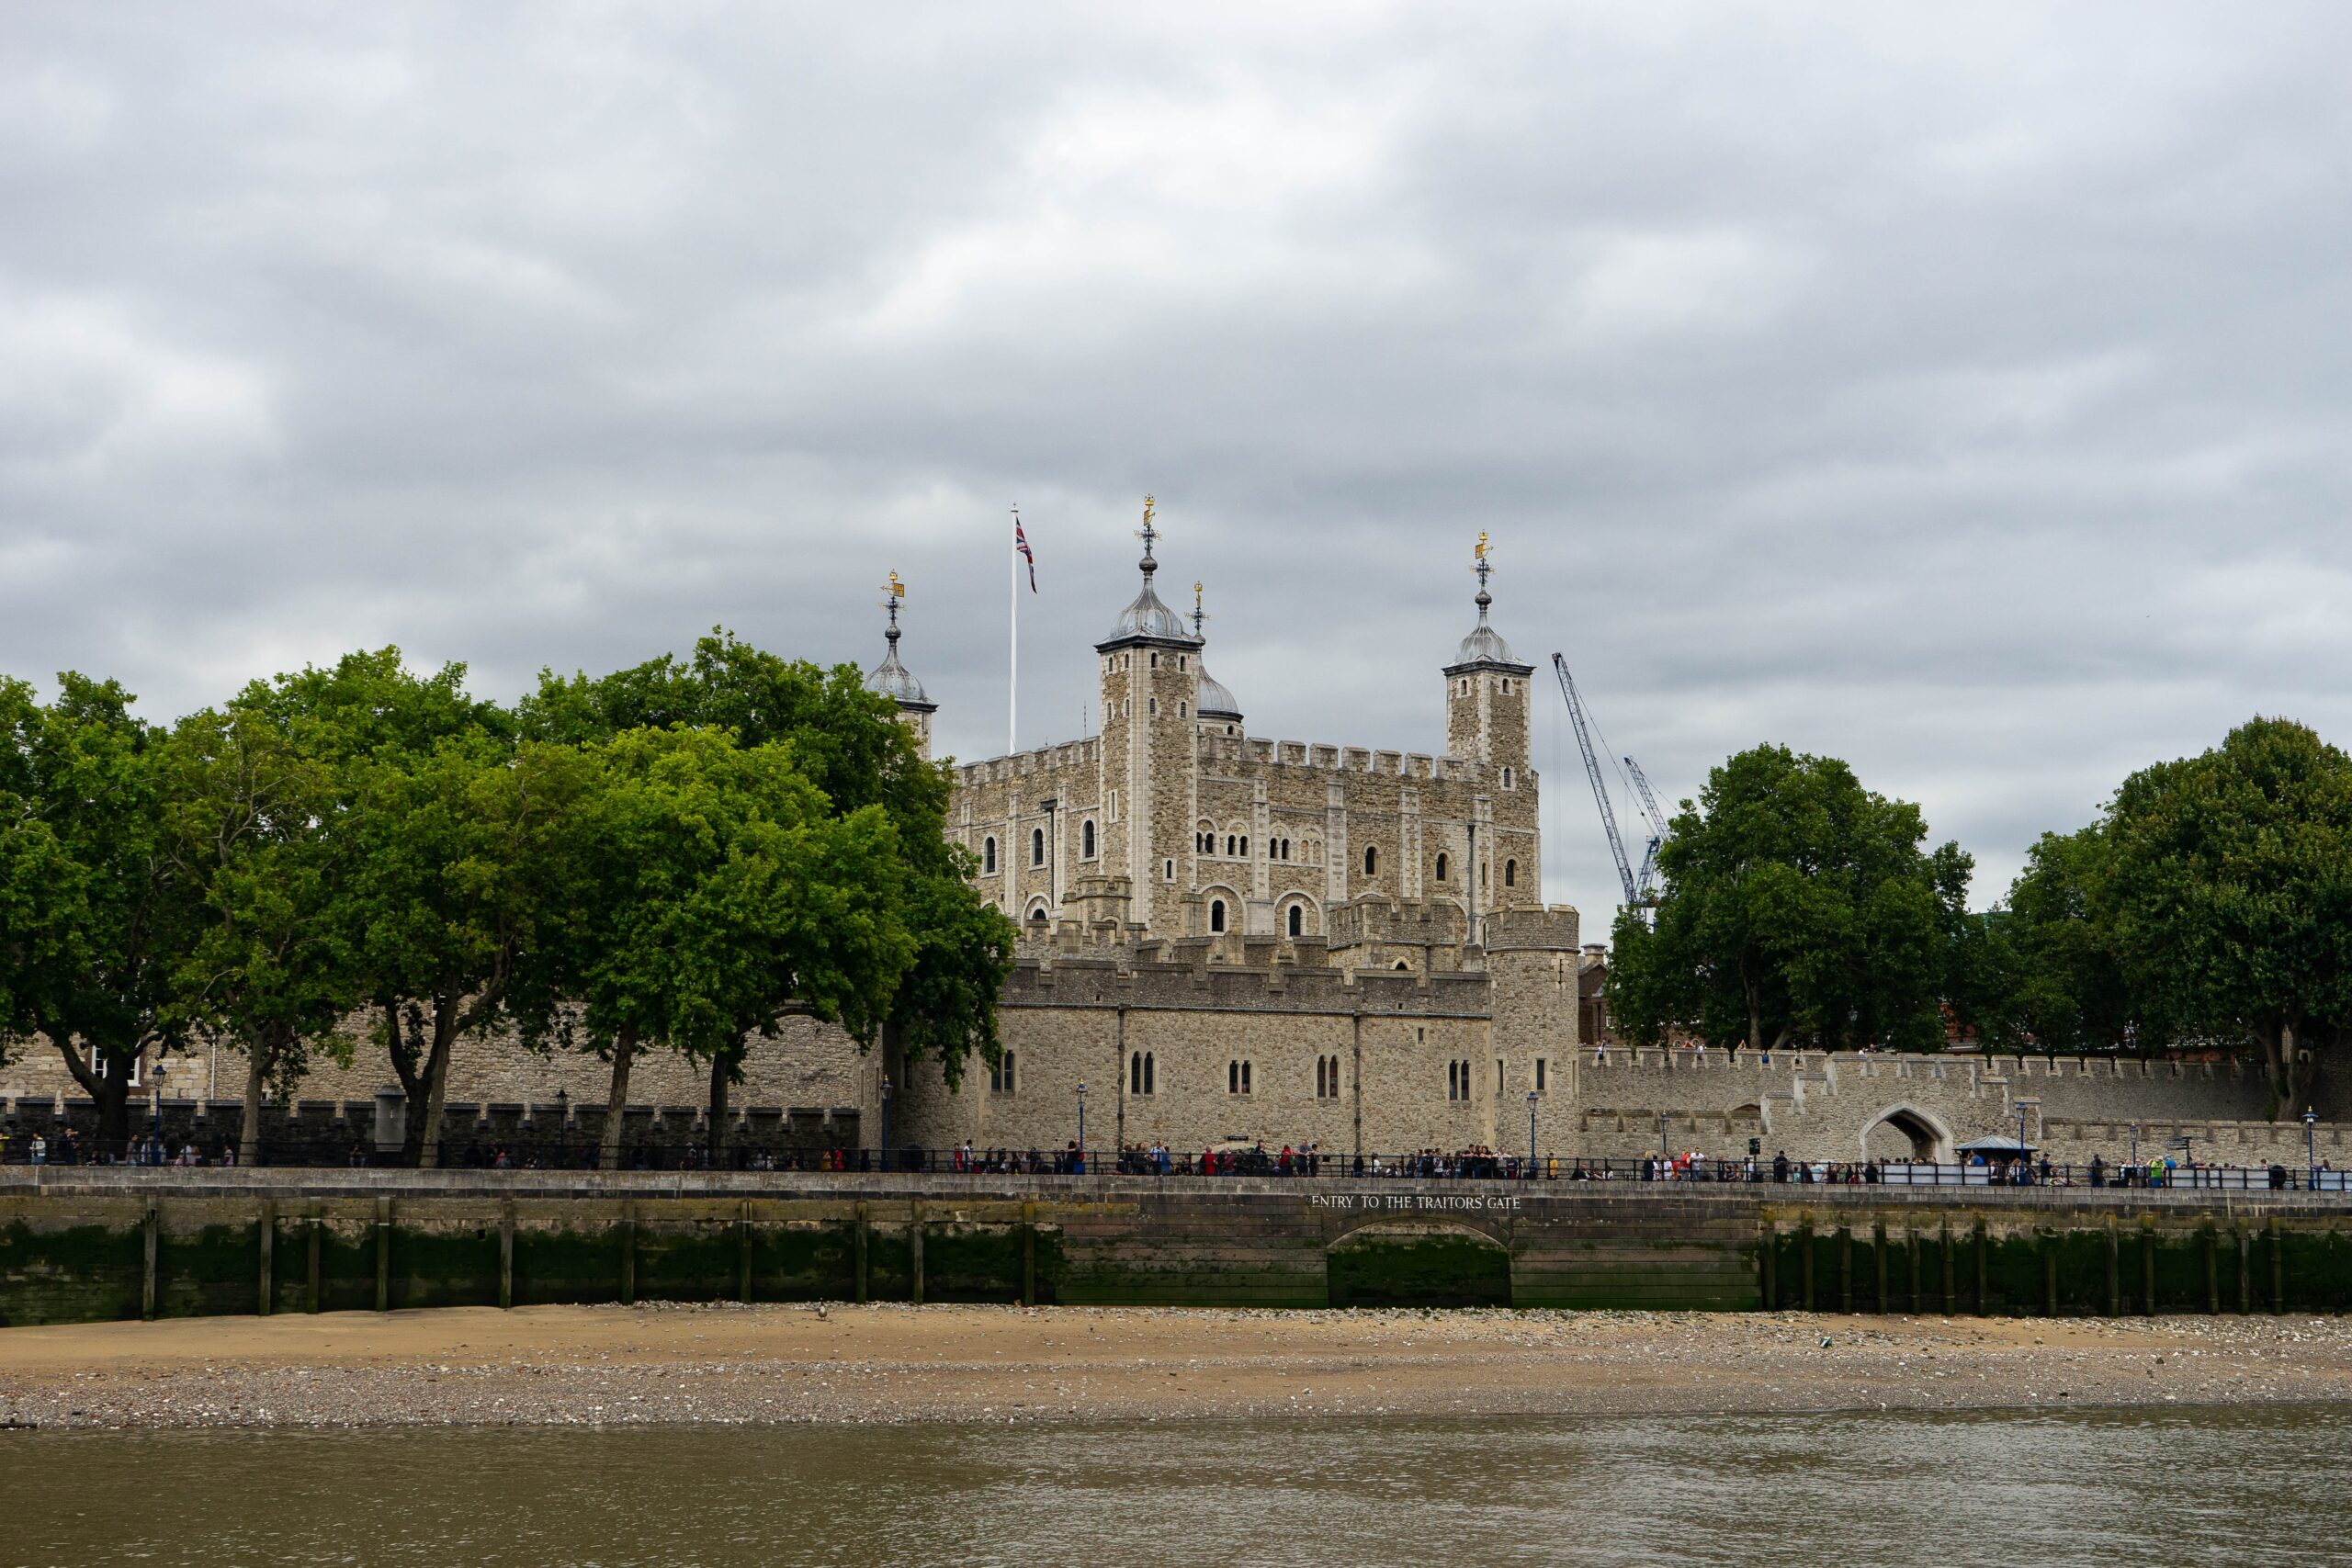 The Tower of London is a stunning fortress that attracts many tourists. 
pictured: The Tower of London on a cloudy day, surrounded by trees 